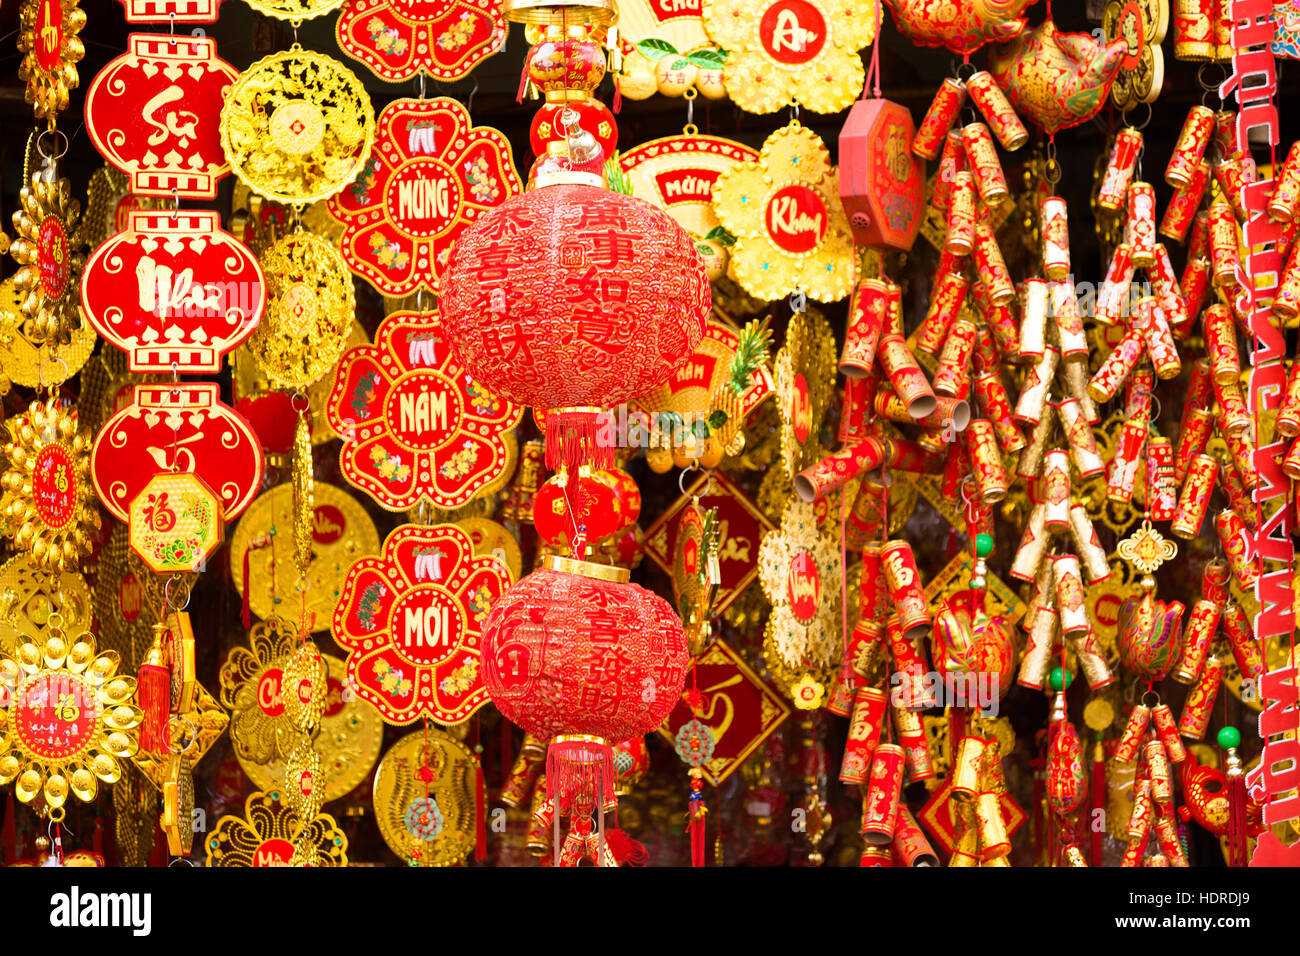 Red Chinese New Year Decorations To Celebrate The Lunar New Year Of Stock Photo Alamy